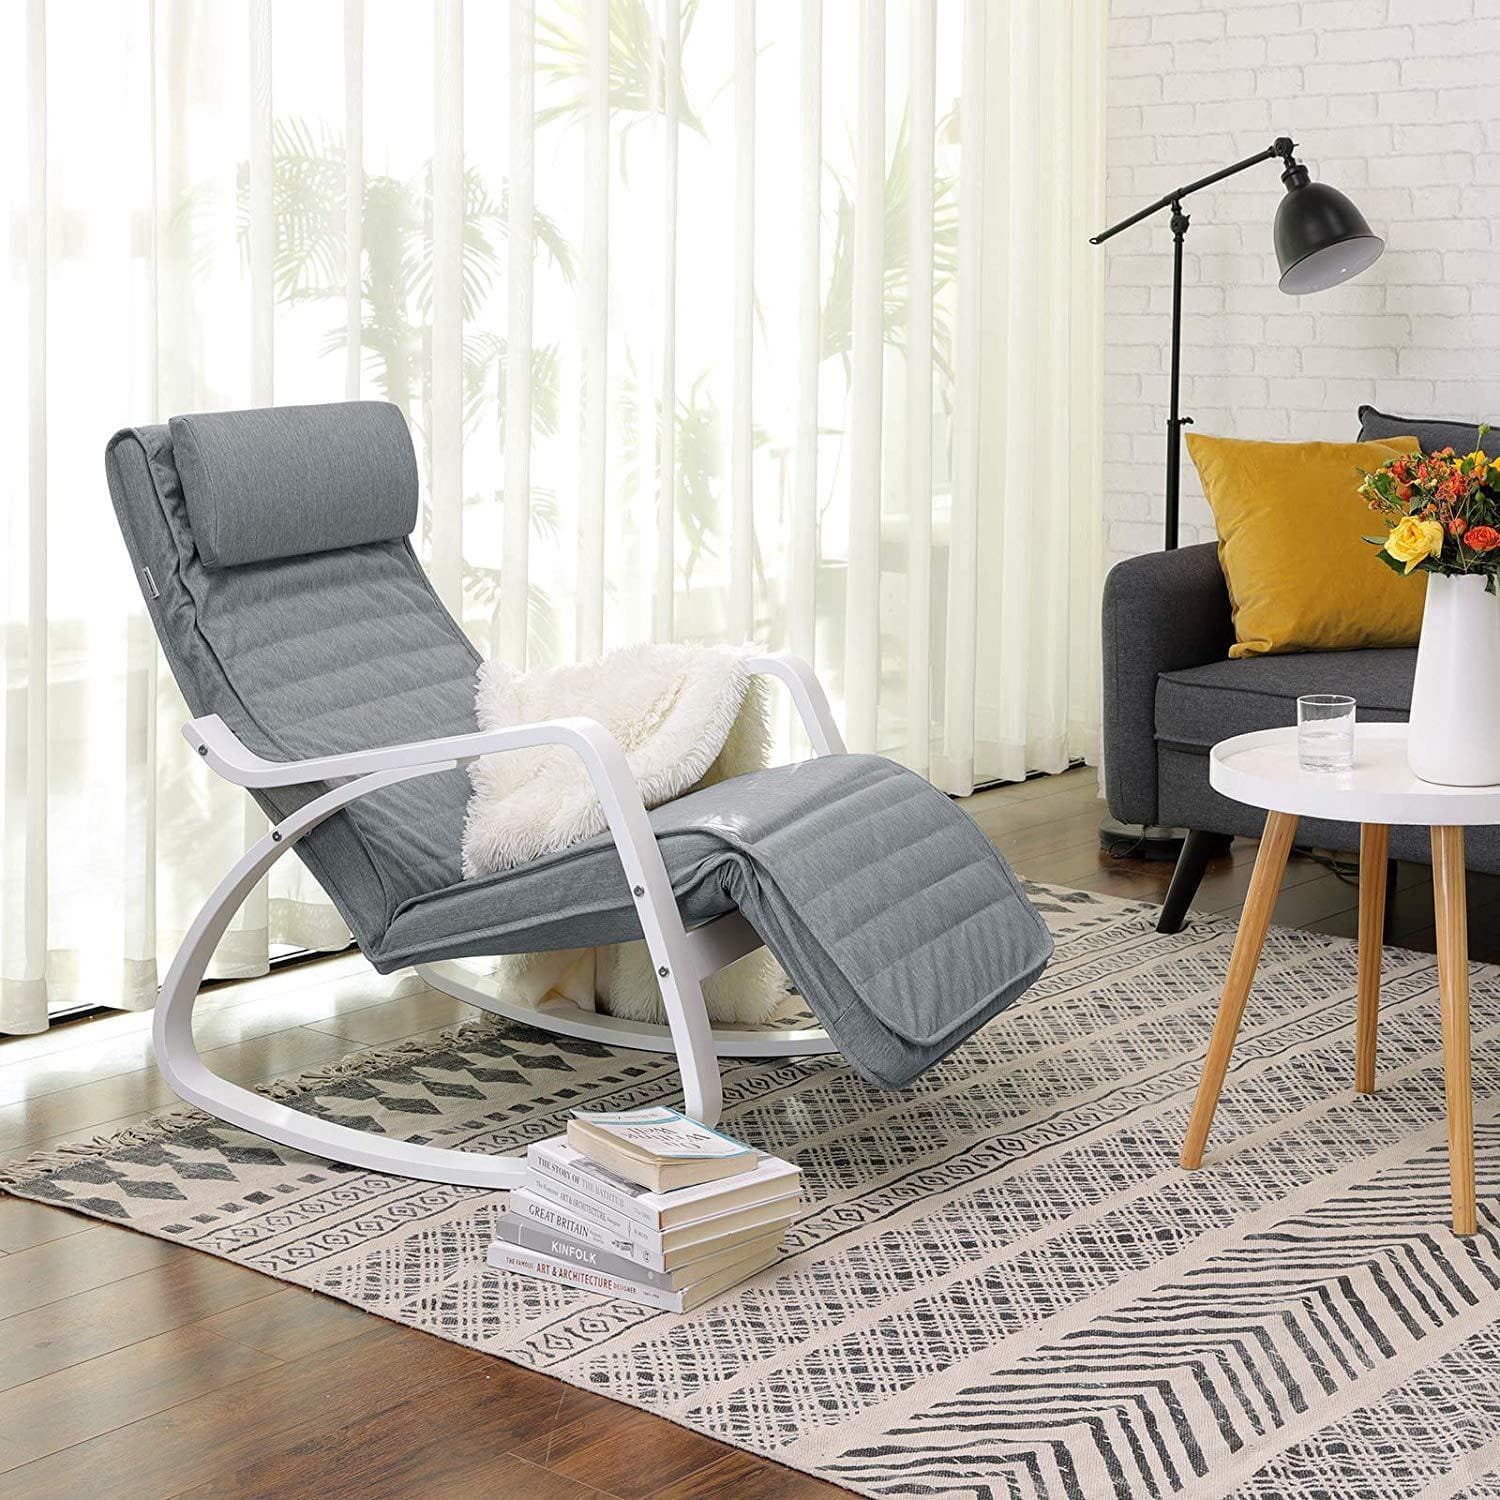 Nancy's Rocking Chair With Footrest - Adjustable Lounger - Relaxation Chair - Armchair - Birch Wood - 150 kg load capacity - Gray